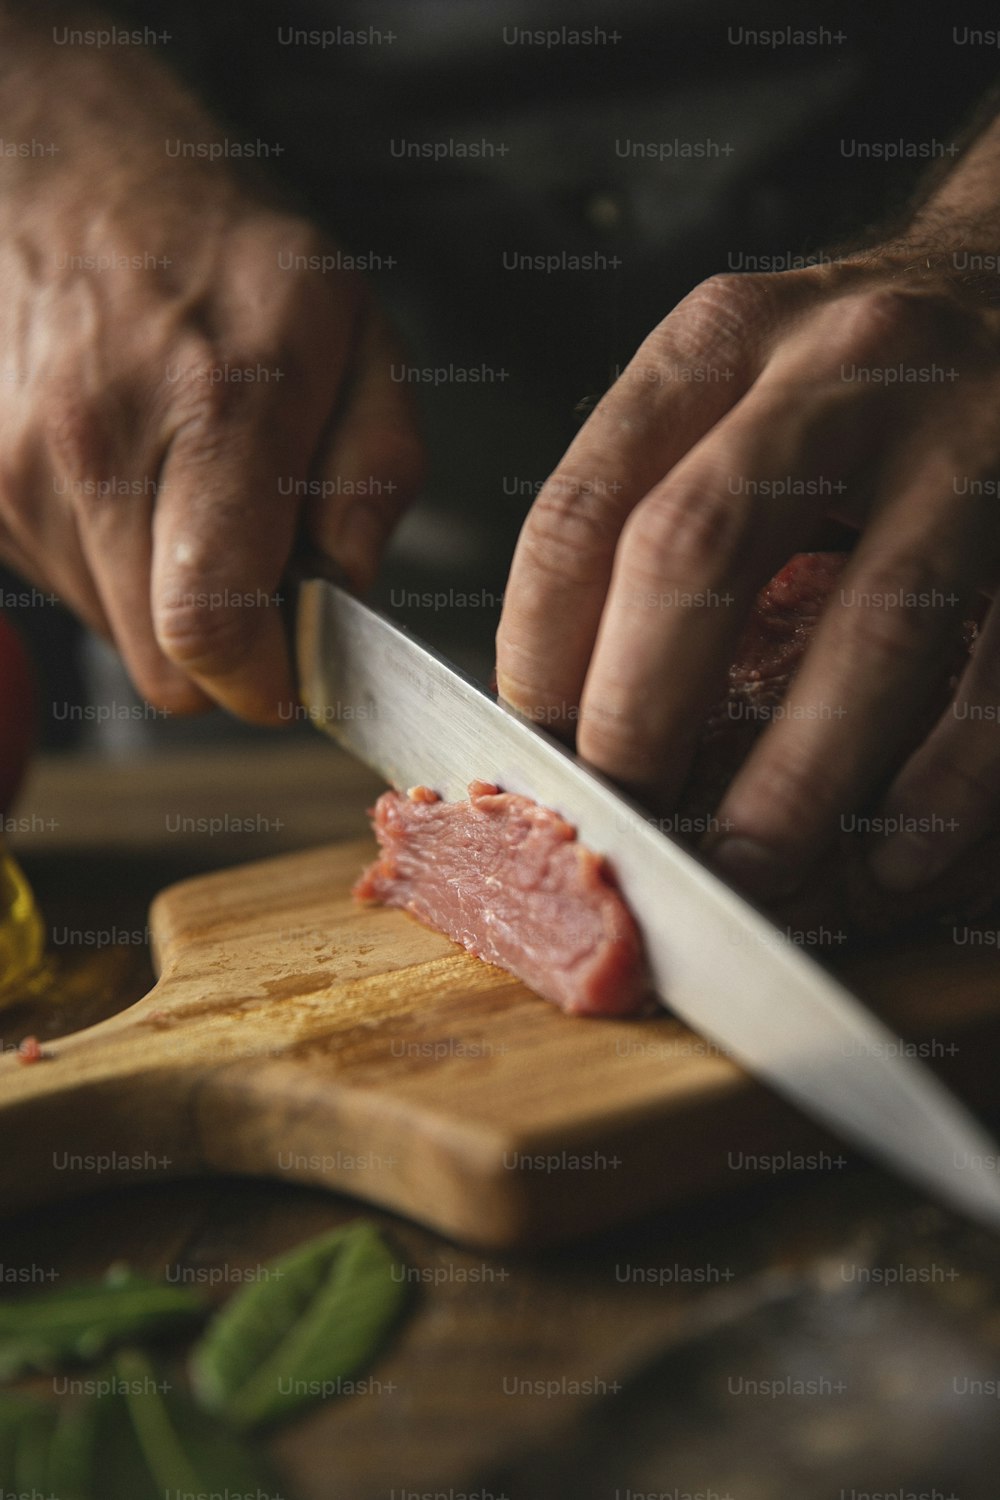 a man is cutting up a piece of meat on a cutting board